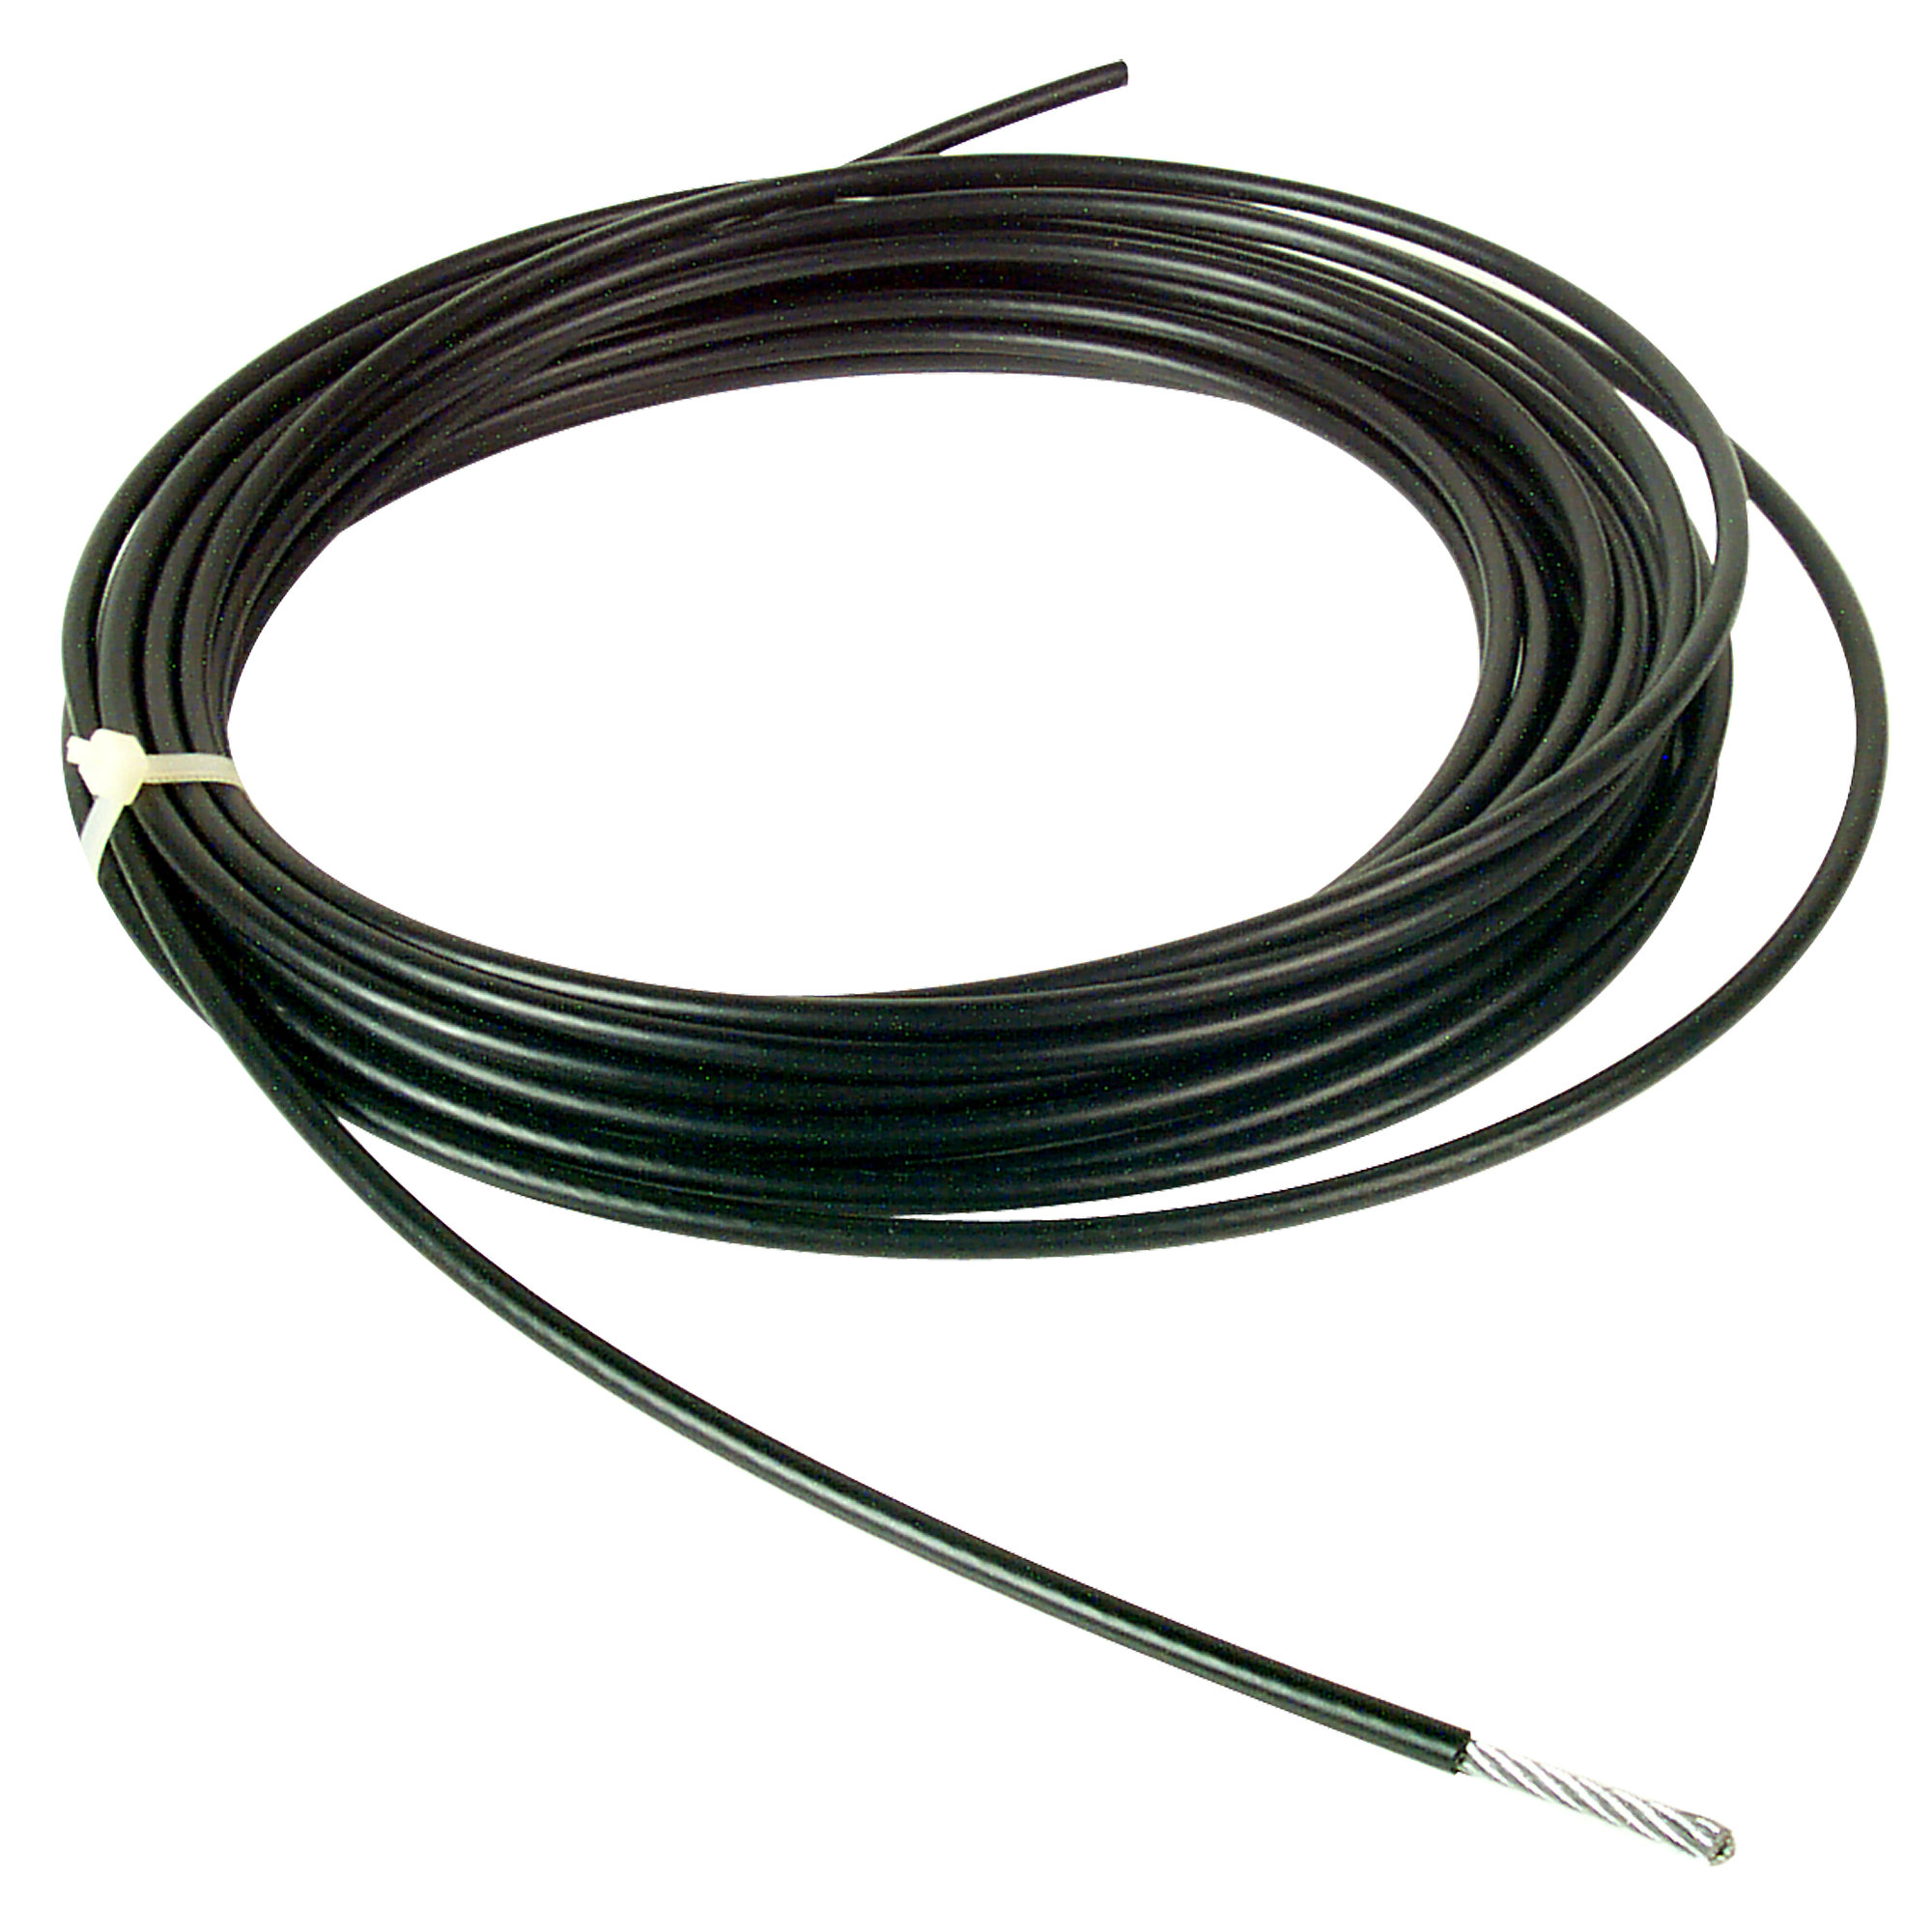 Cable by the Foot | 3/16" Diameter with Black Nylon Coating